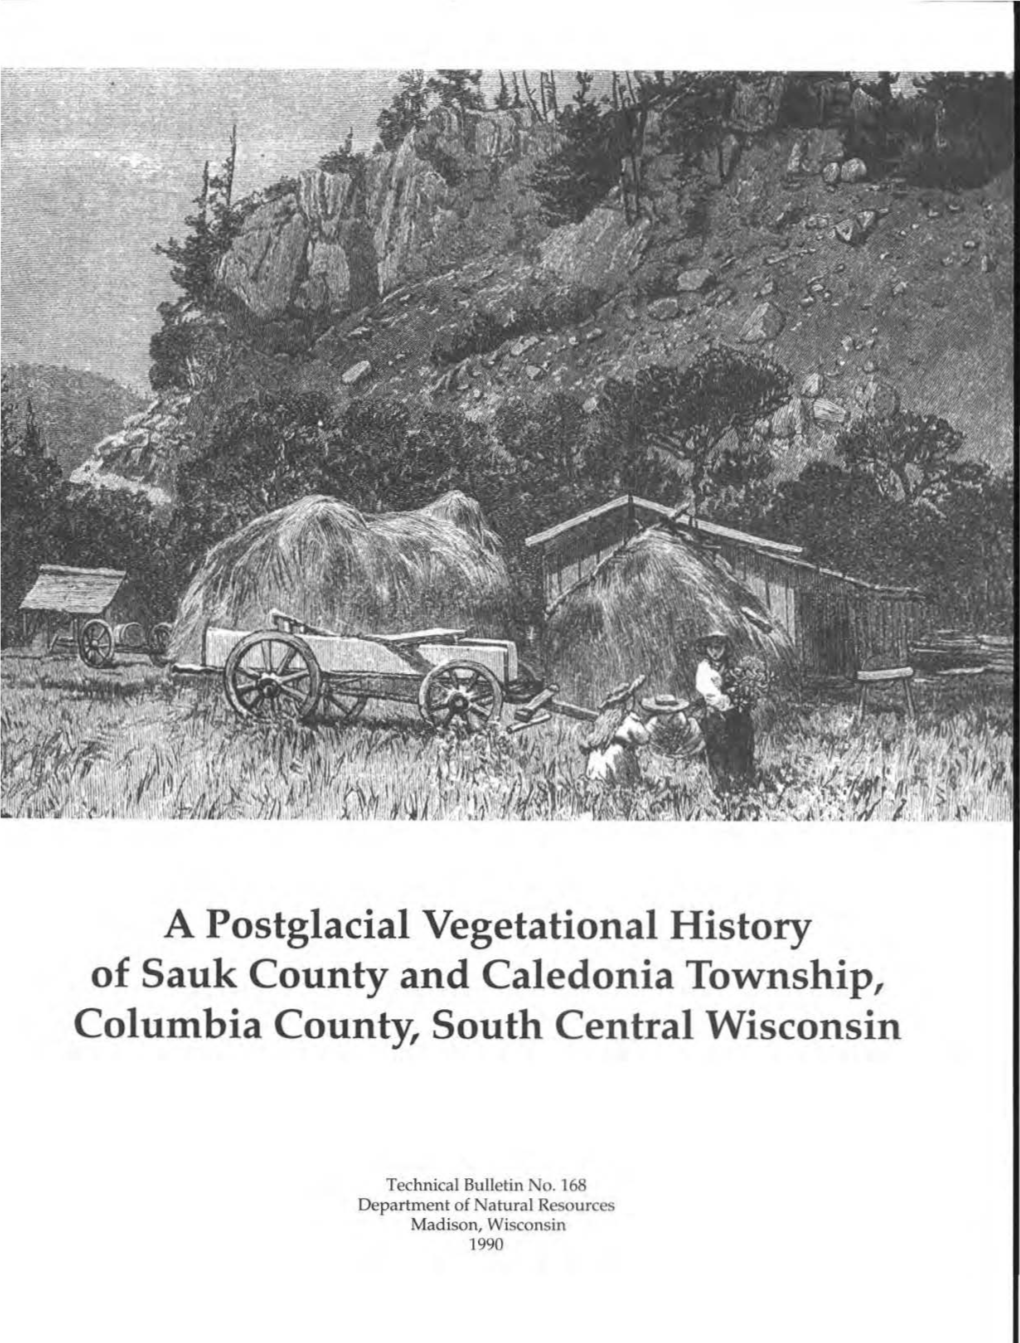 A Postglacial Vegetational History of Sauk County and Caledonia Township, Columbia County, South Central Wisconsin